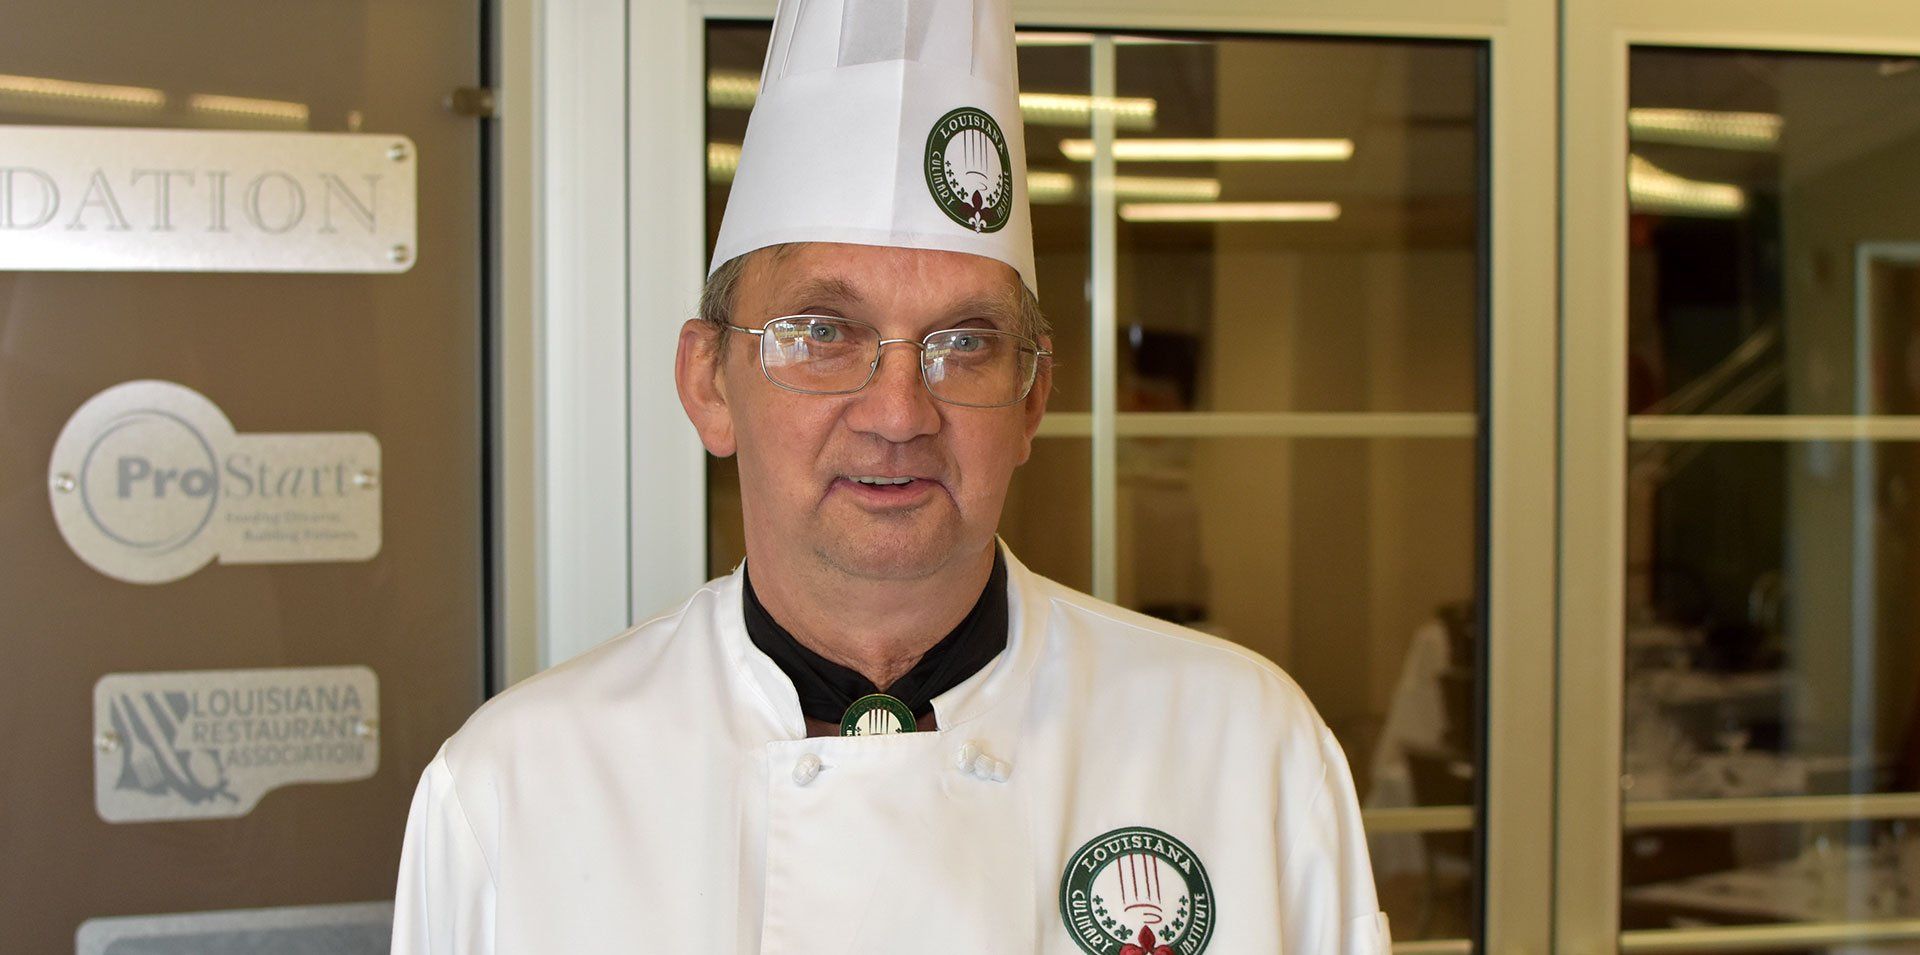 Chef George Michael Dunn Chef Instructor at LCI